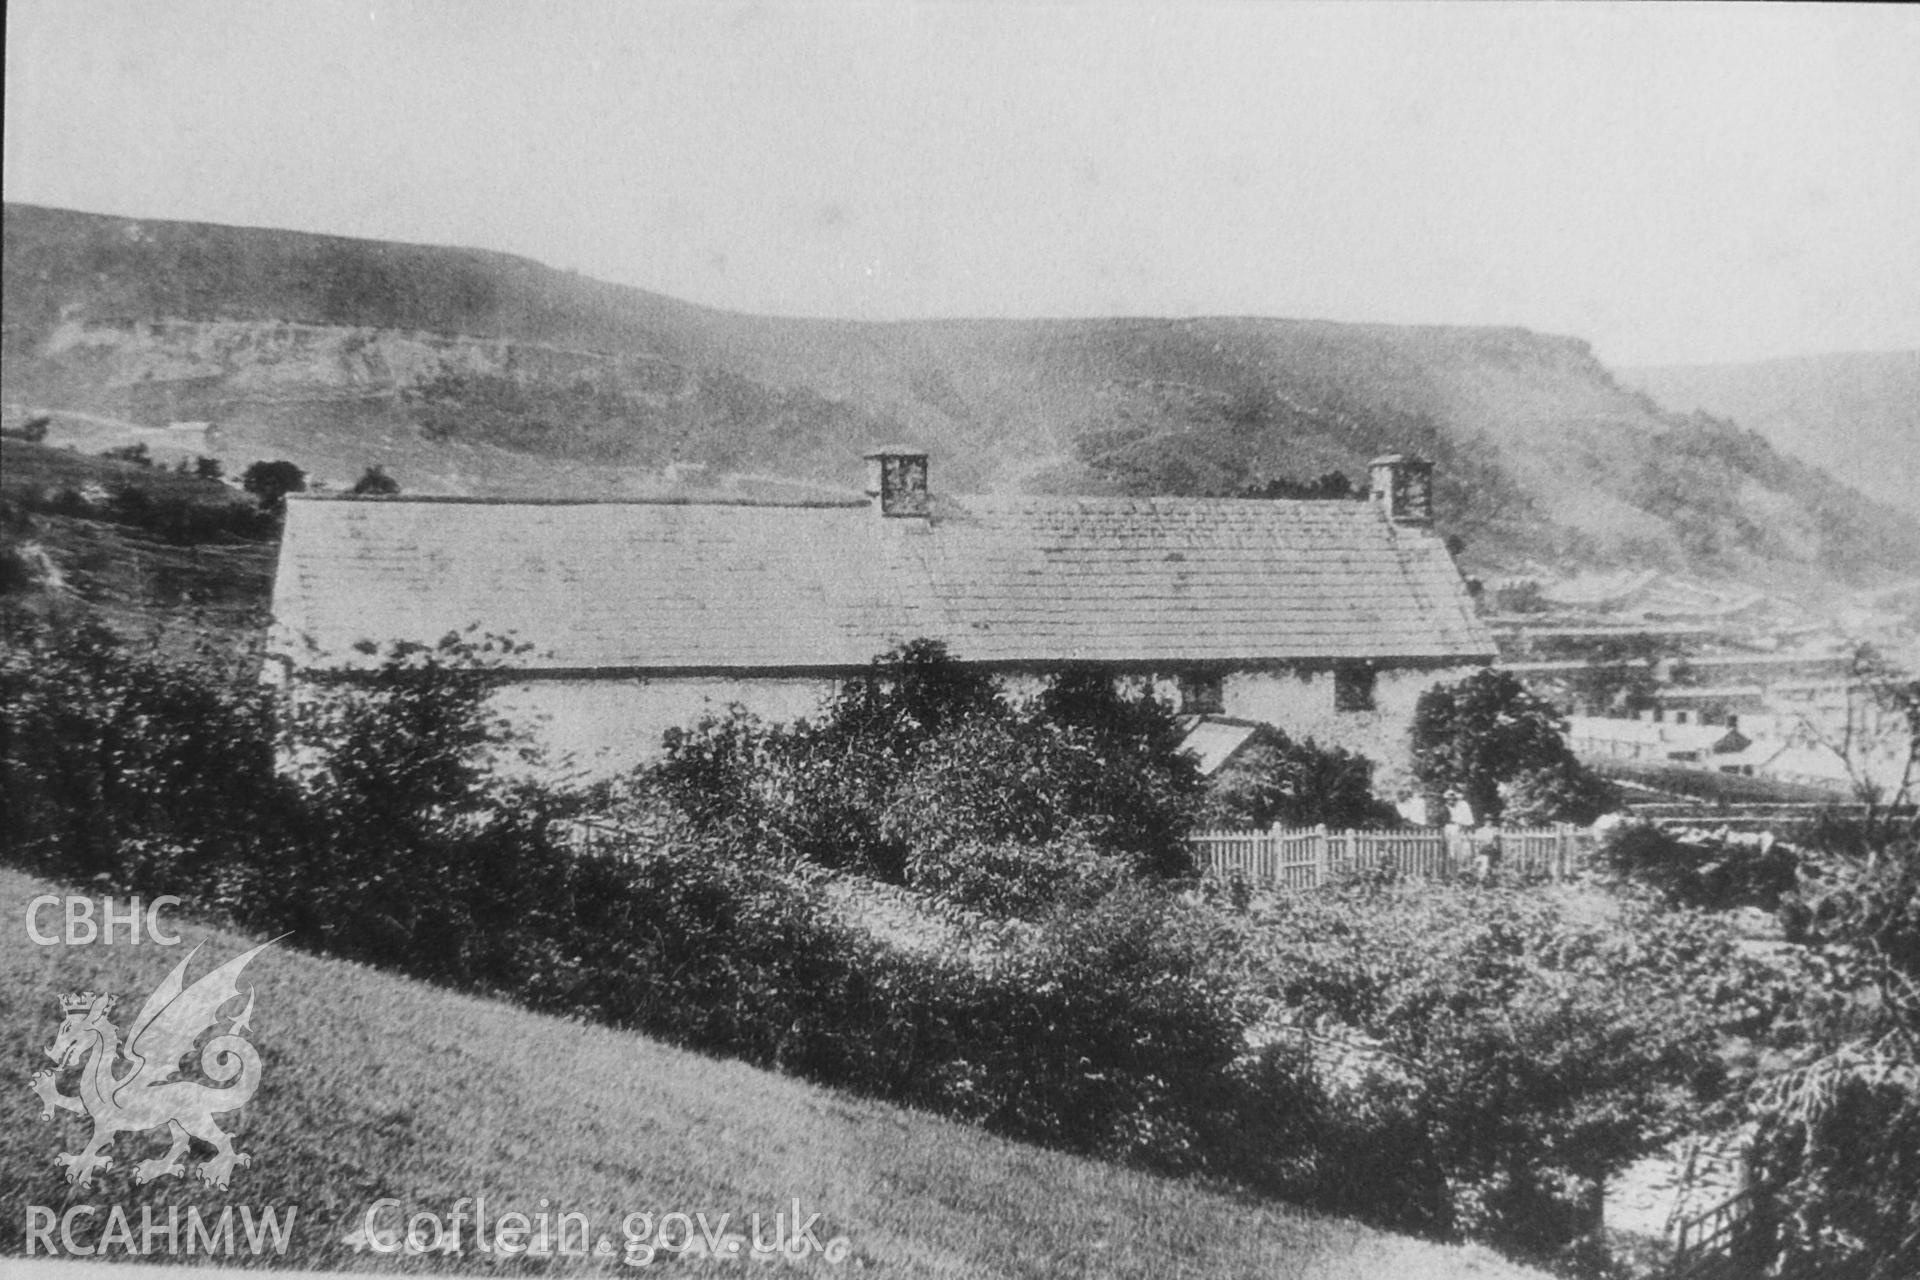 Black and white photo showing a c.1900 view of Gellifaelog, Tonypandy  copied by Paul R. Davis.